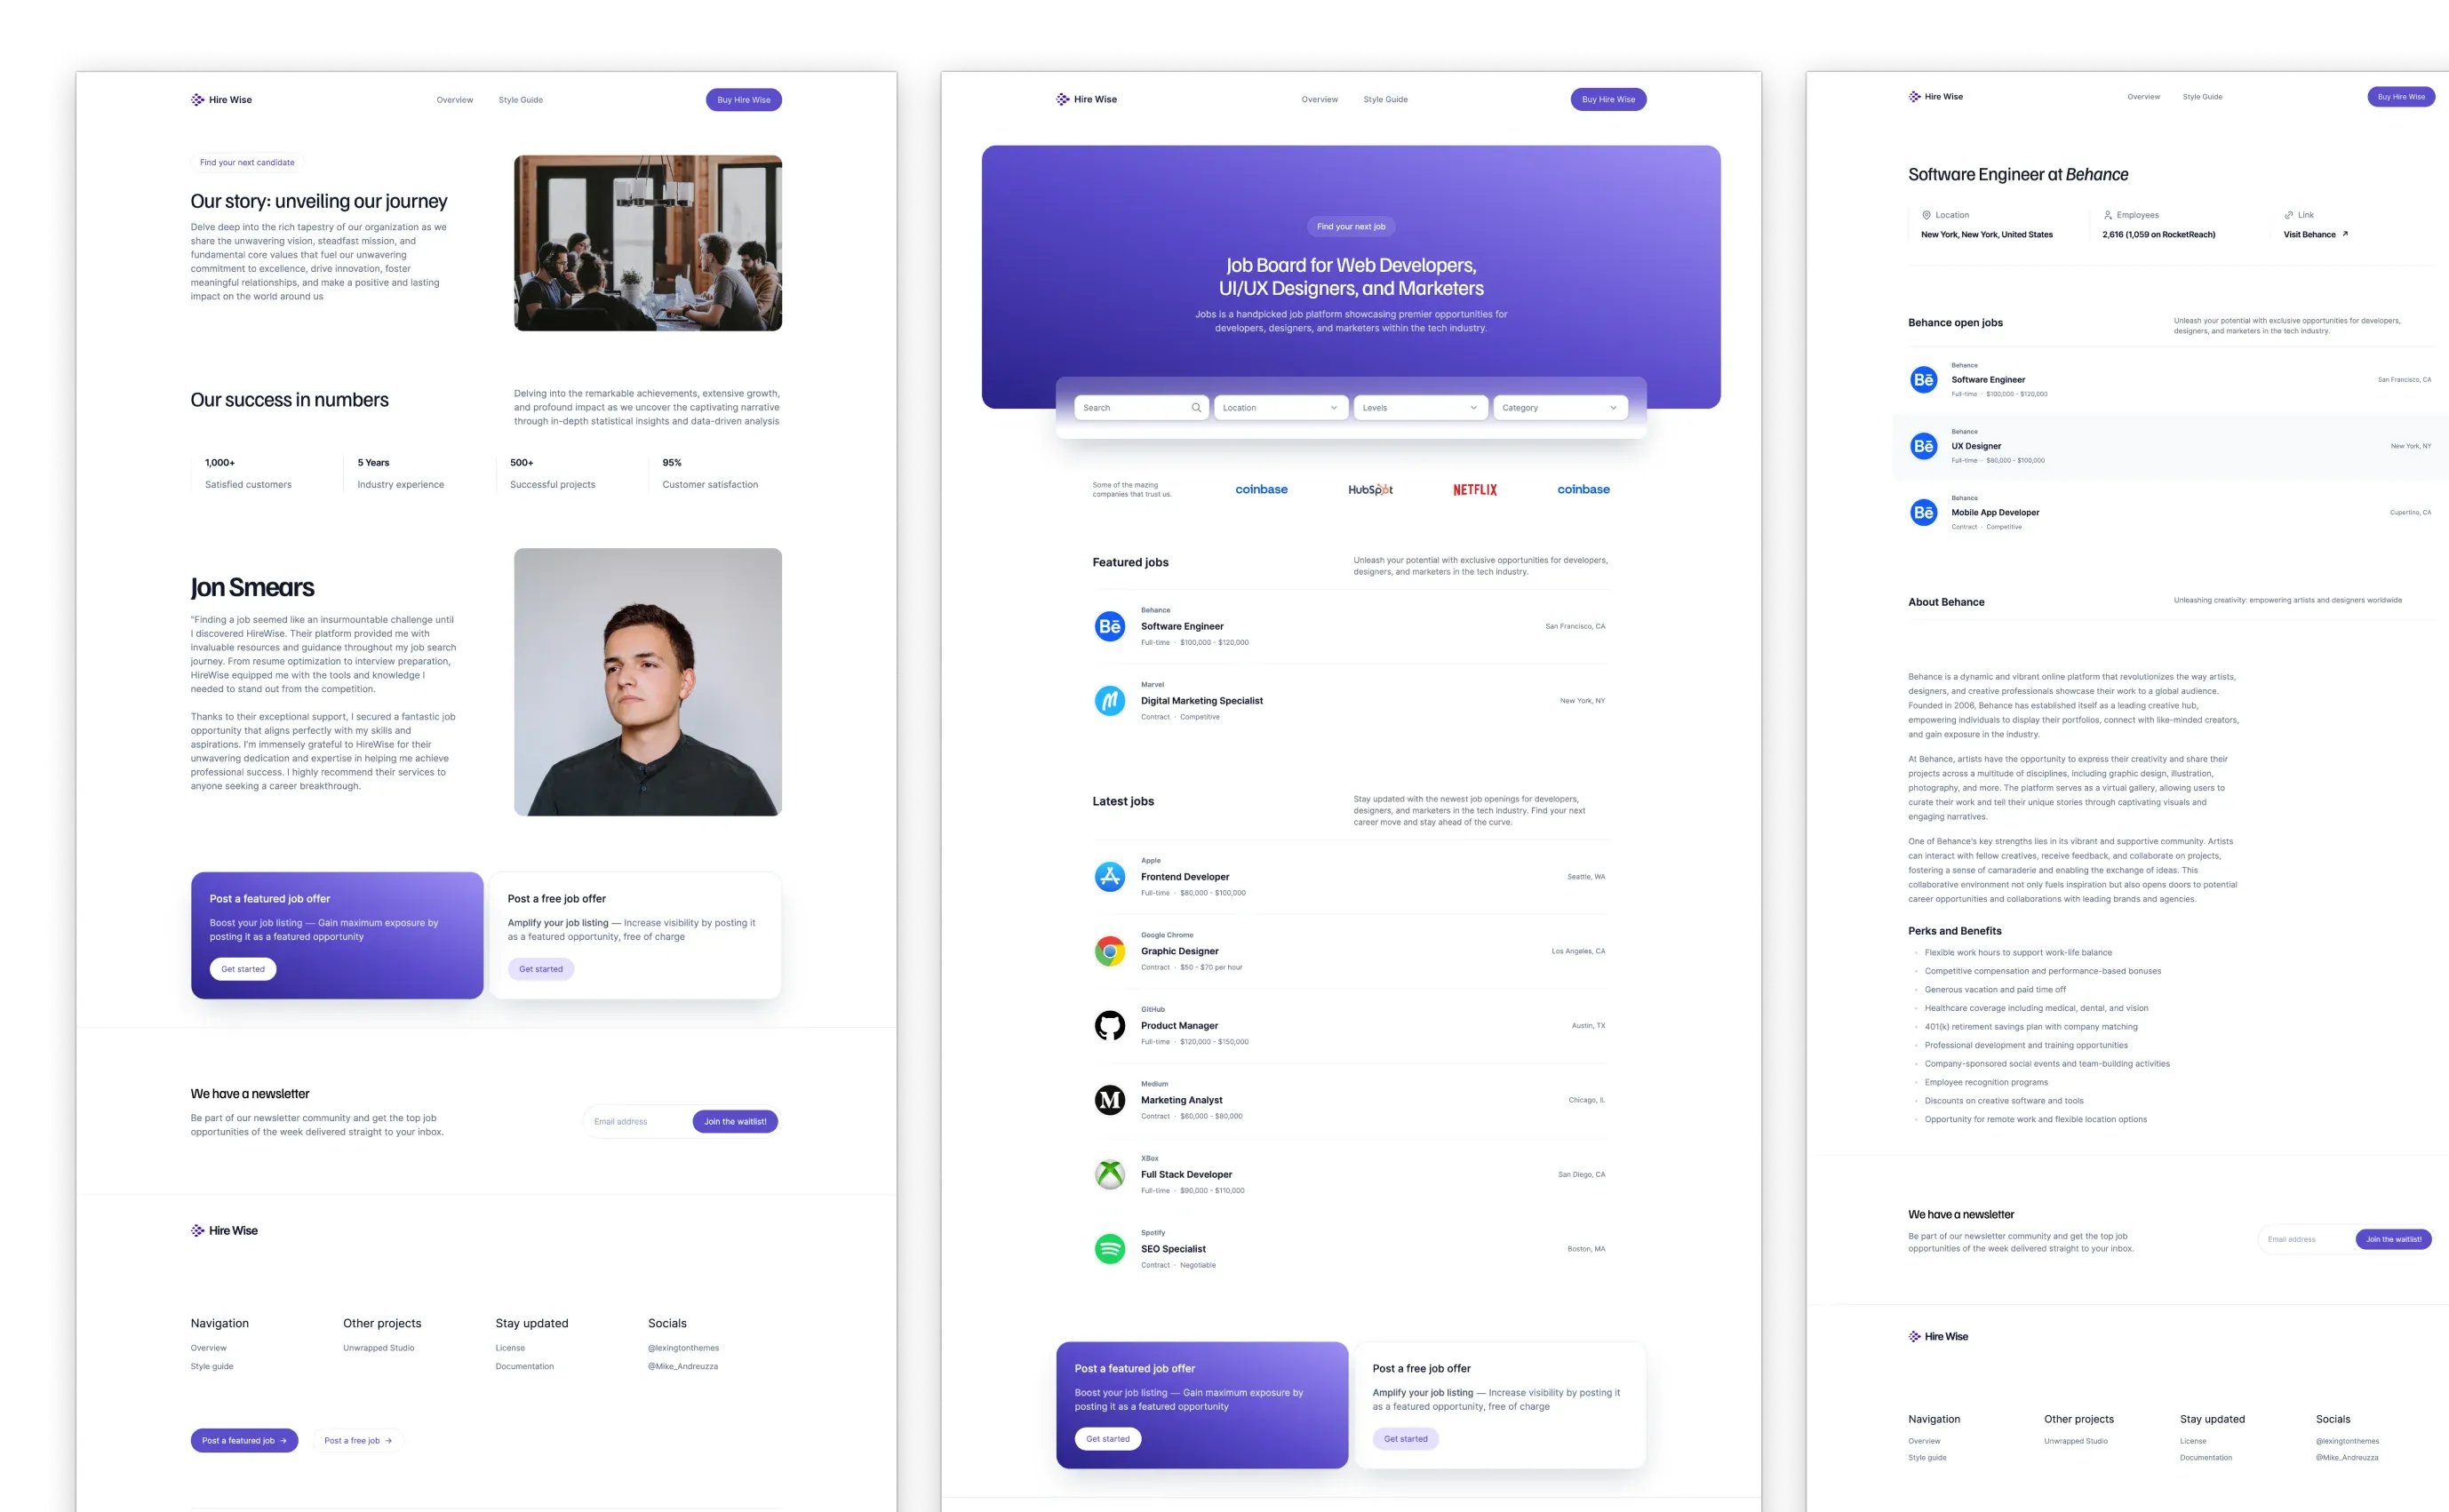 HireWise theme showcasing a job board platform for professionals, with a clean interface incorporating purple and white design elements. The layout includes a search panel for job listings, featured job opportunities from companies like Behance and Netflix, and a section for user testimonials detailing successful employment stories.